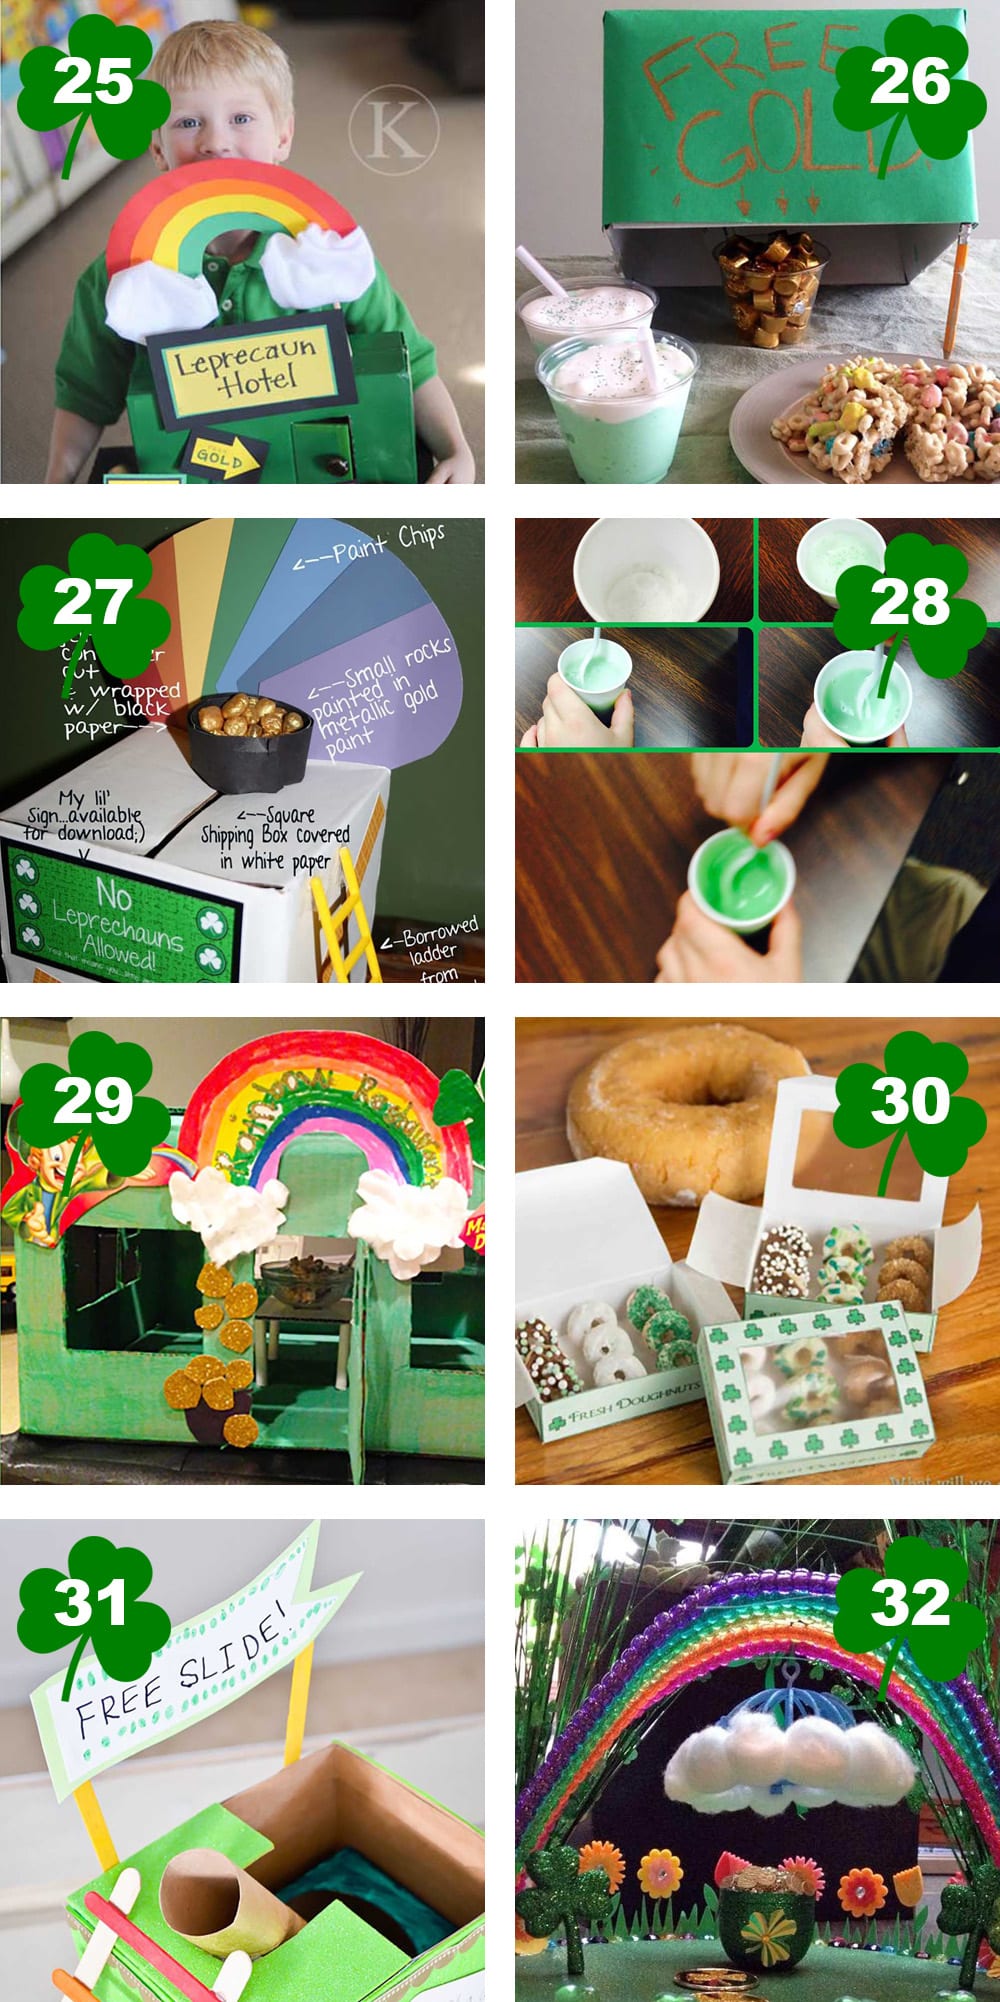 50 Easy Leprechaun Trap Ideas that will have you catching those leprechauns and finding their pot of gold in no time! Merakimother.com